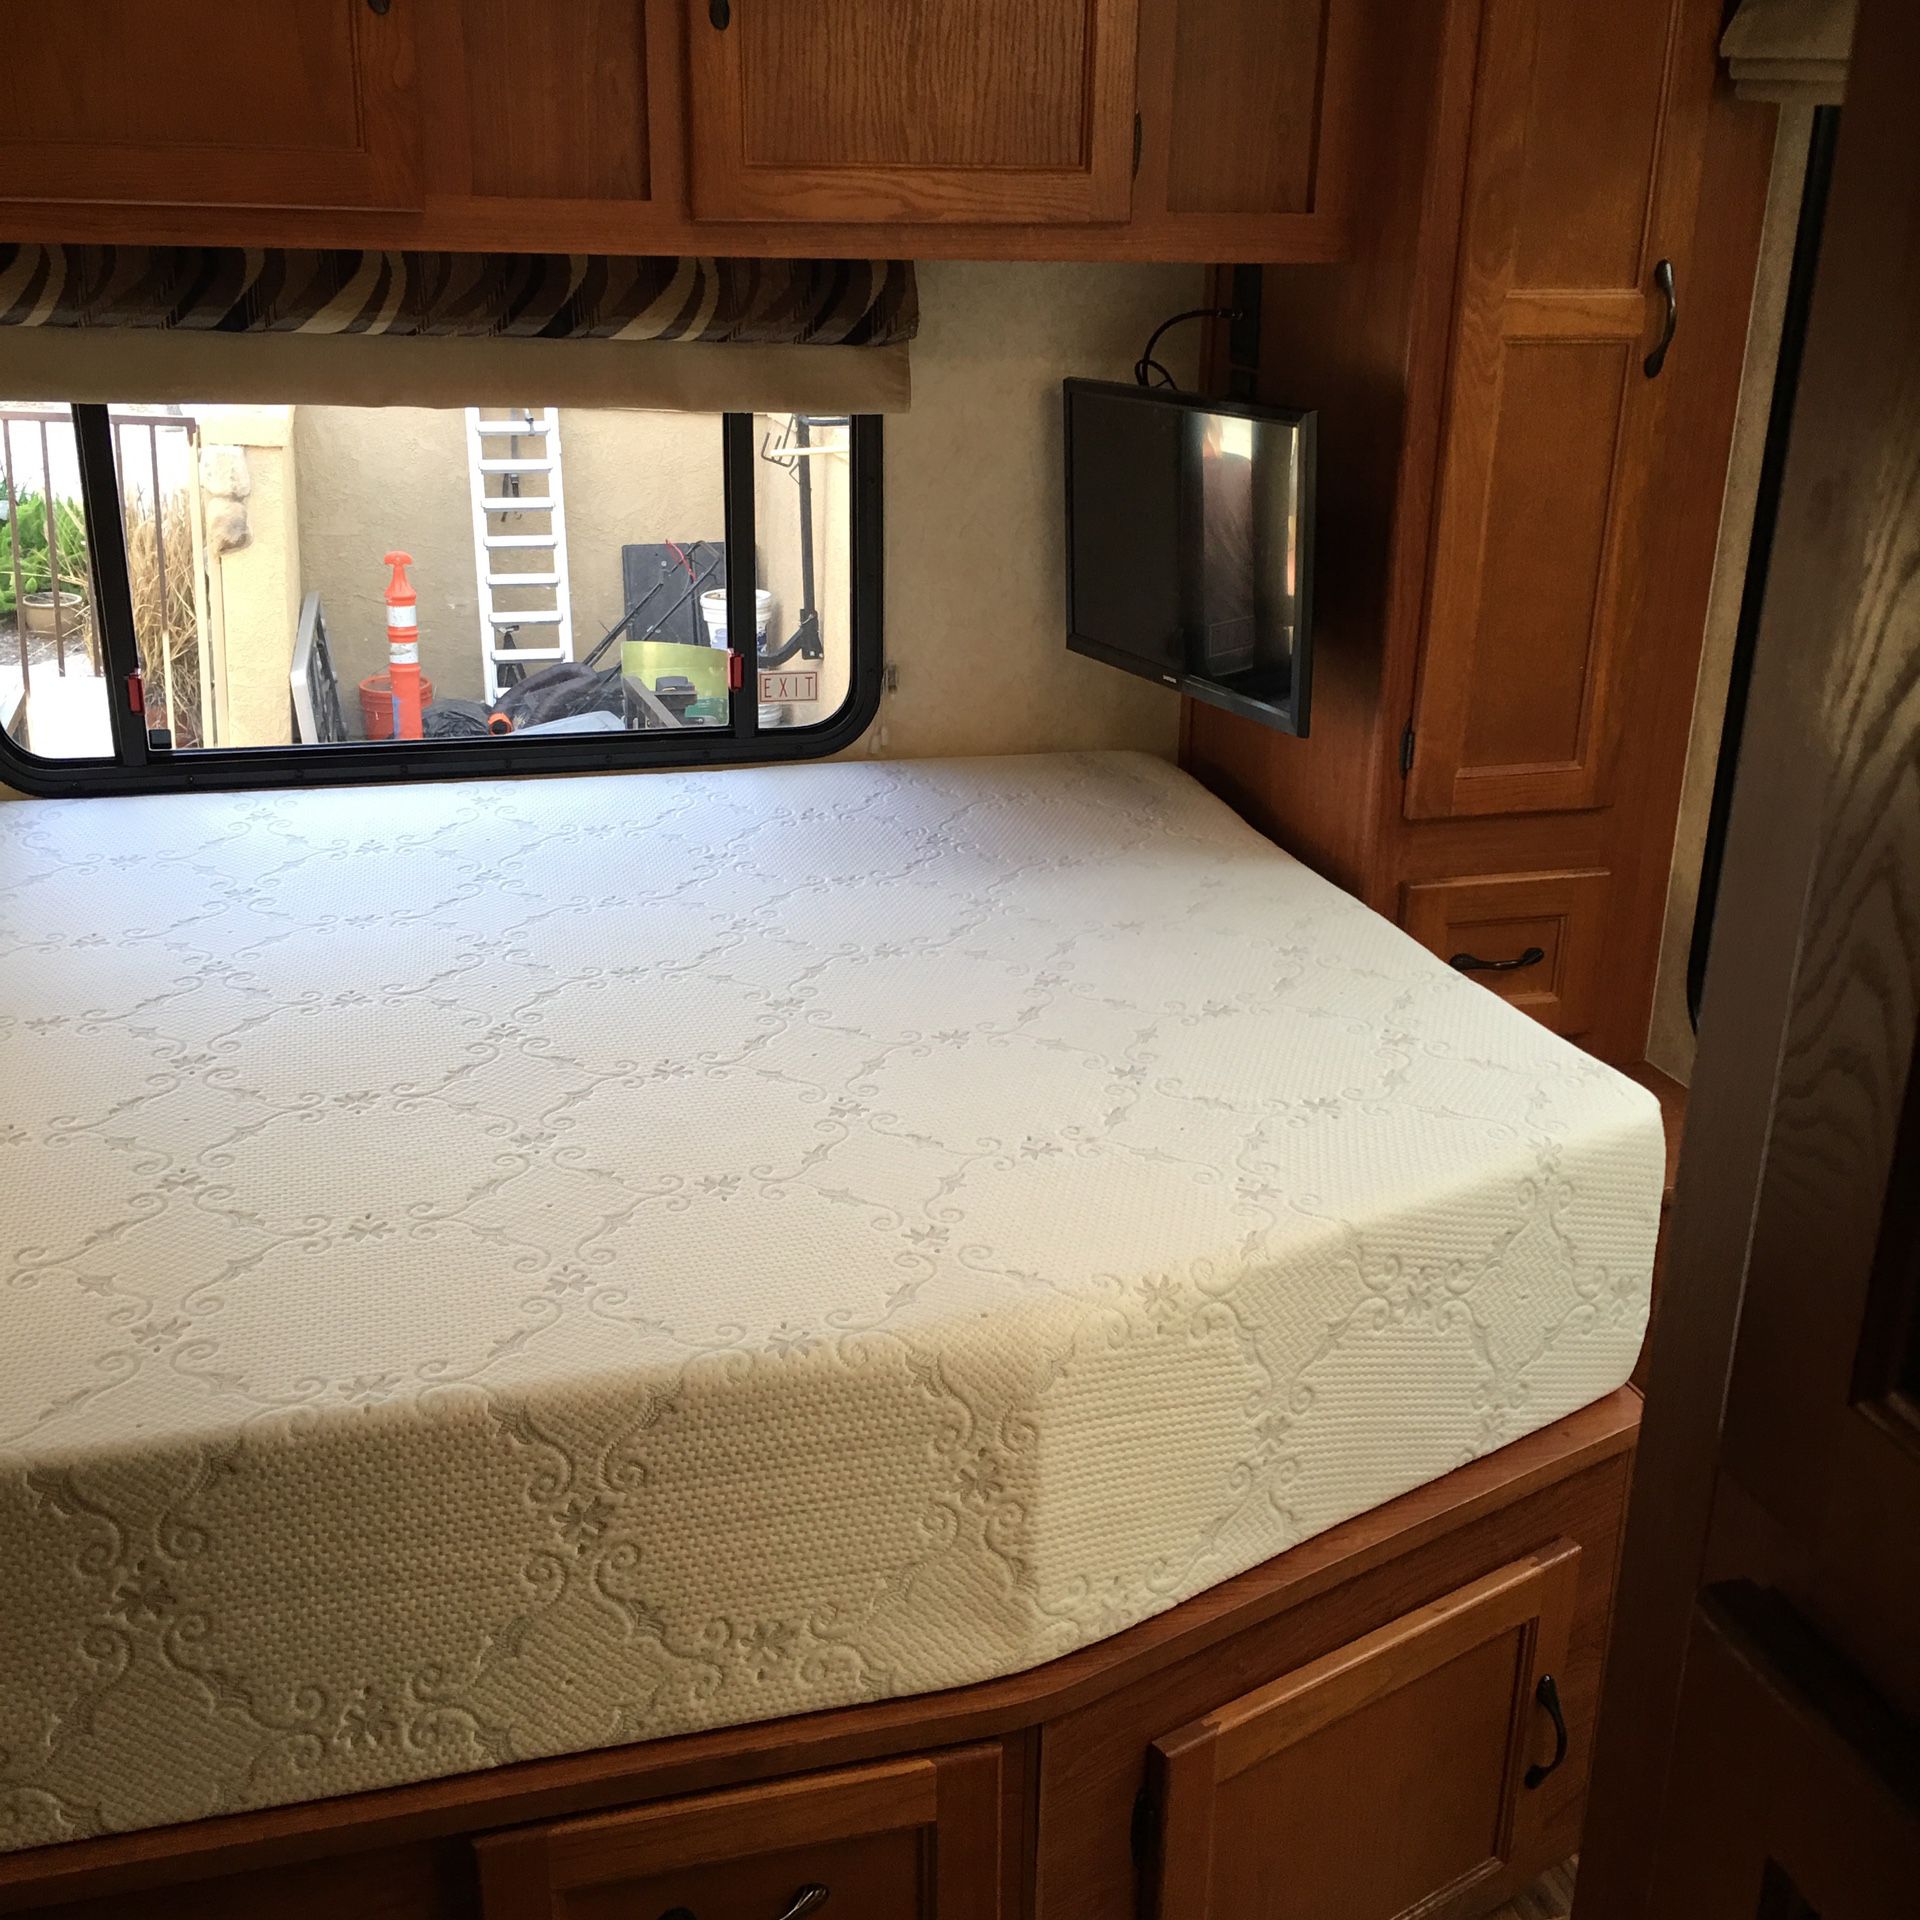 Memory foam mattress made for rv’s boats, trailers